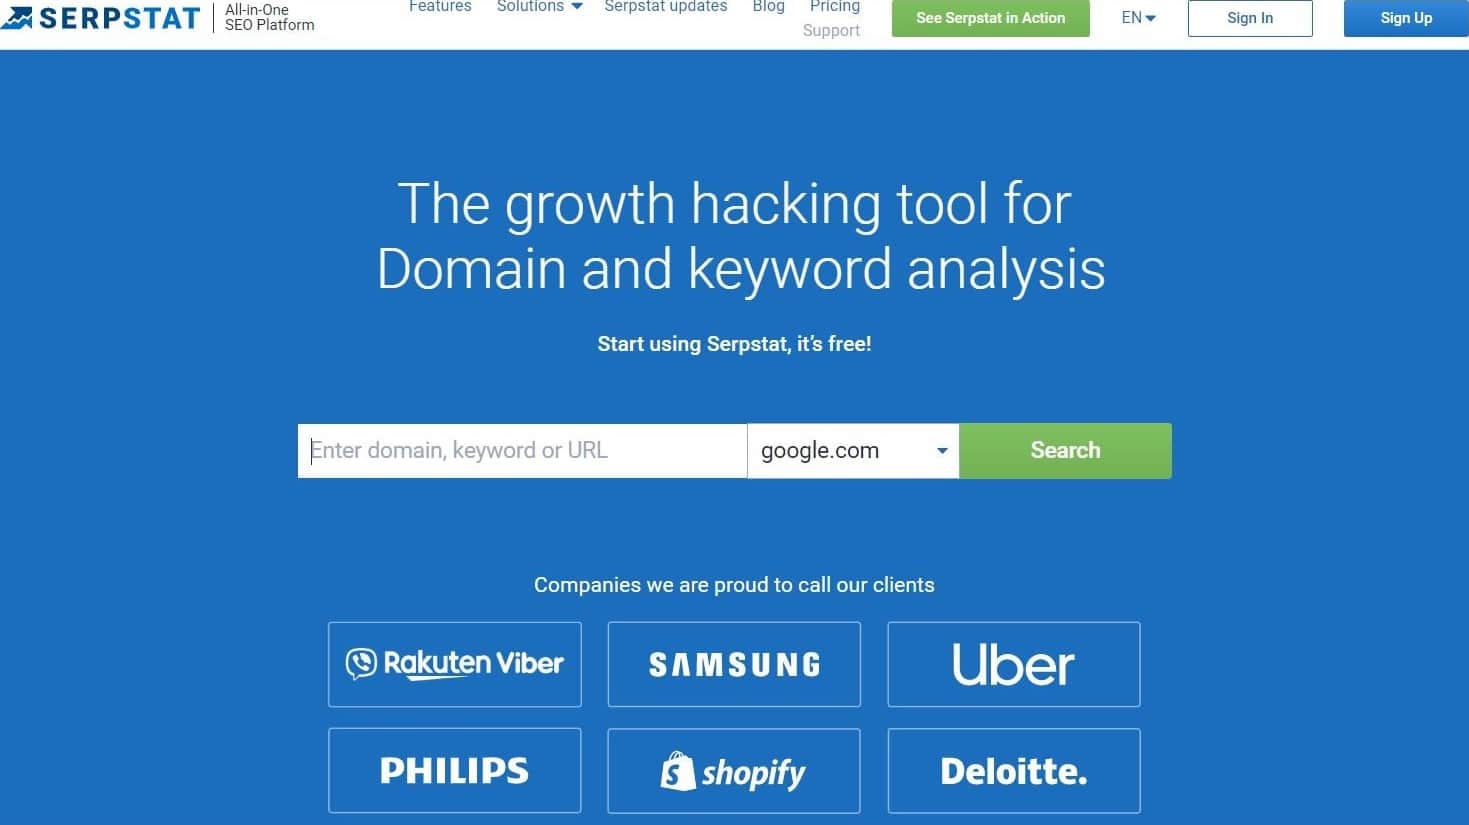 The Serpstat homepage with a search bar and the tagline "The growth hacking tool for Domain and keyword analysis".